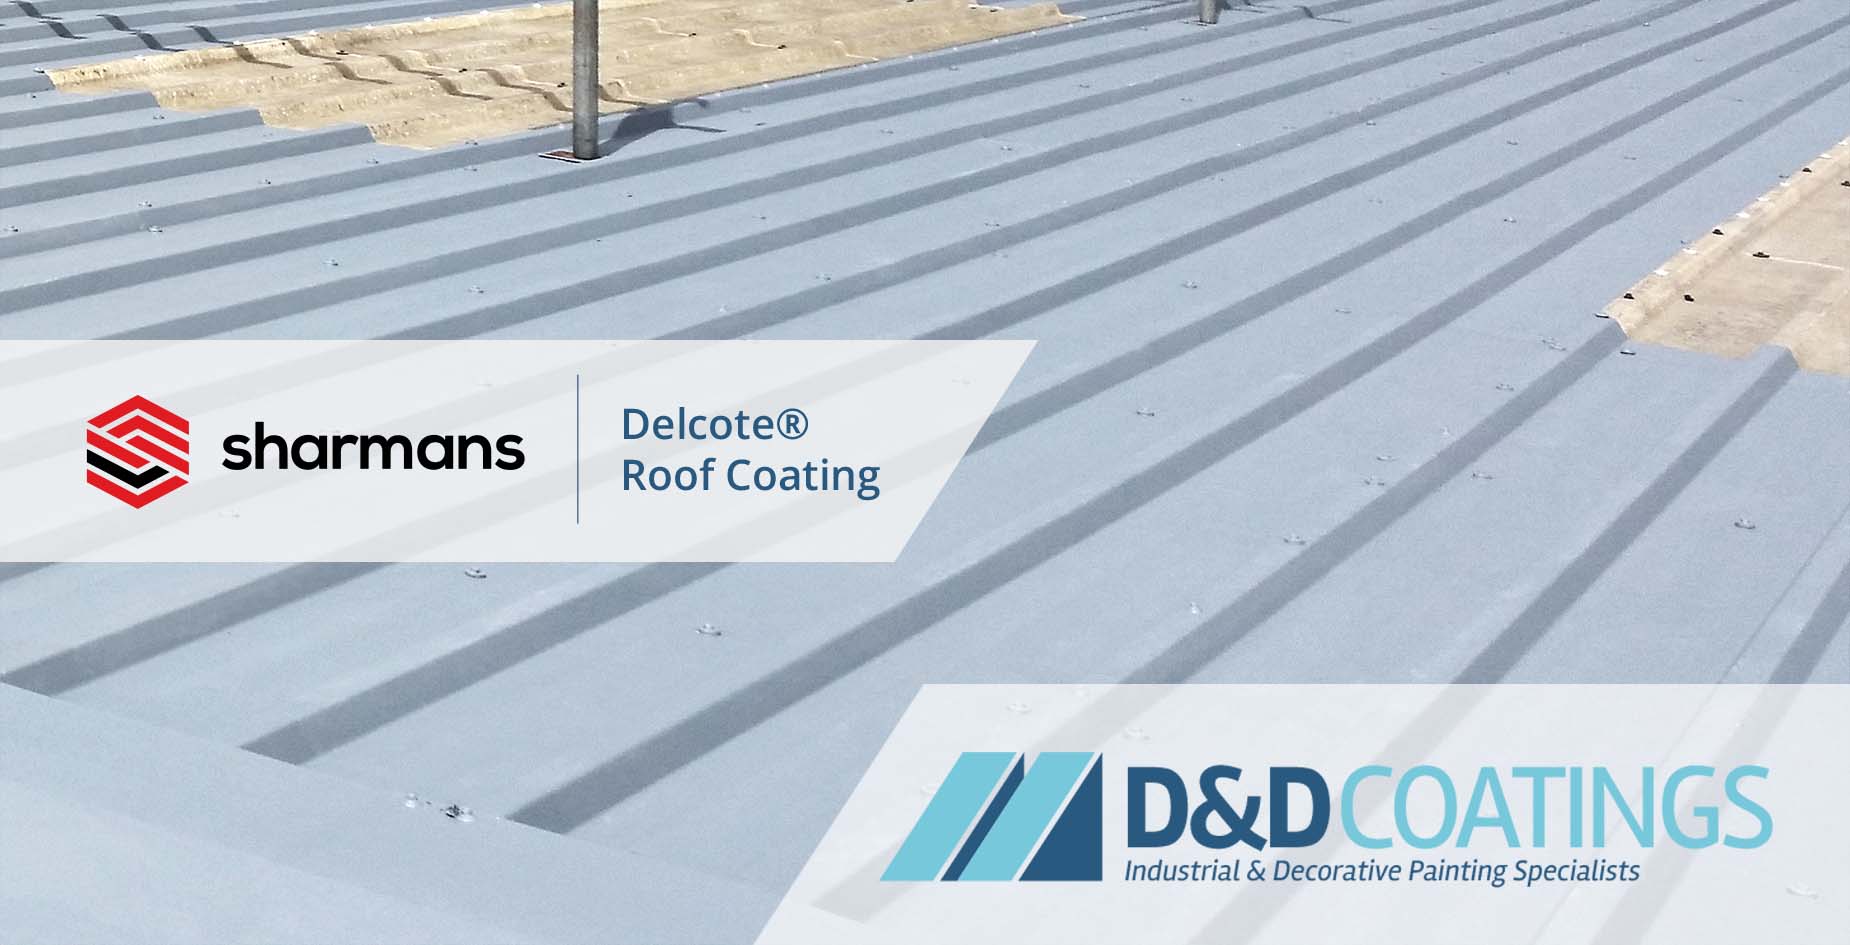 delcote roof coatings options poster image